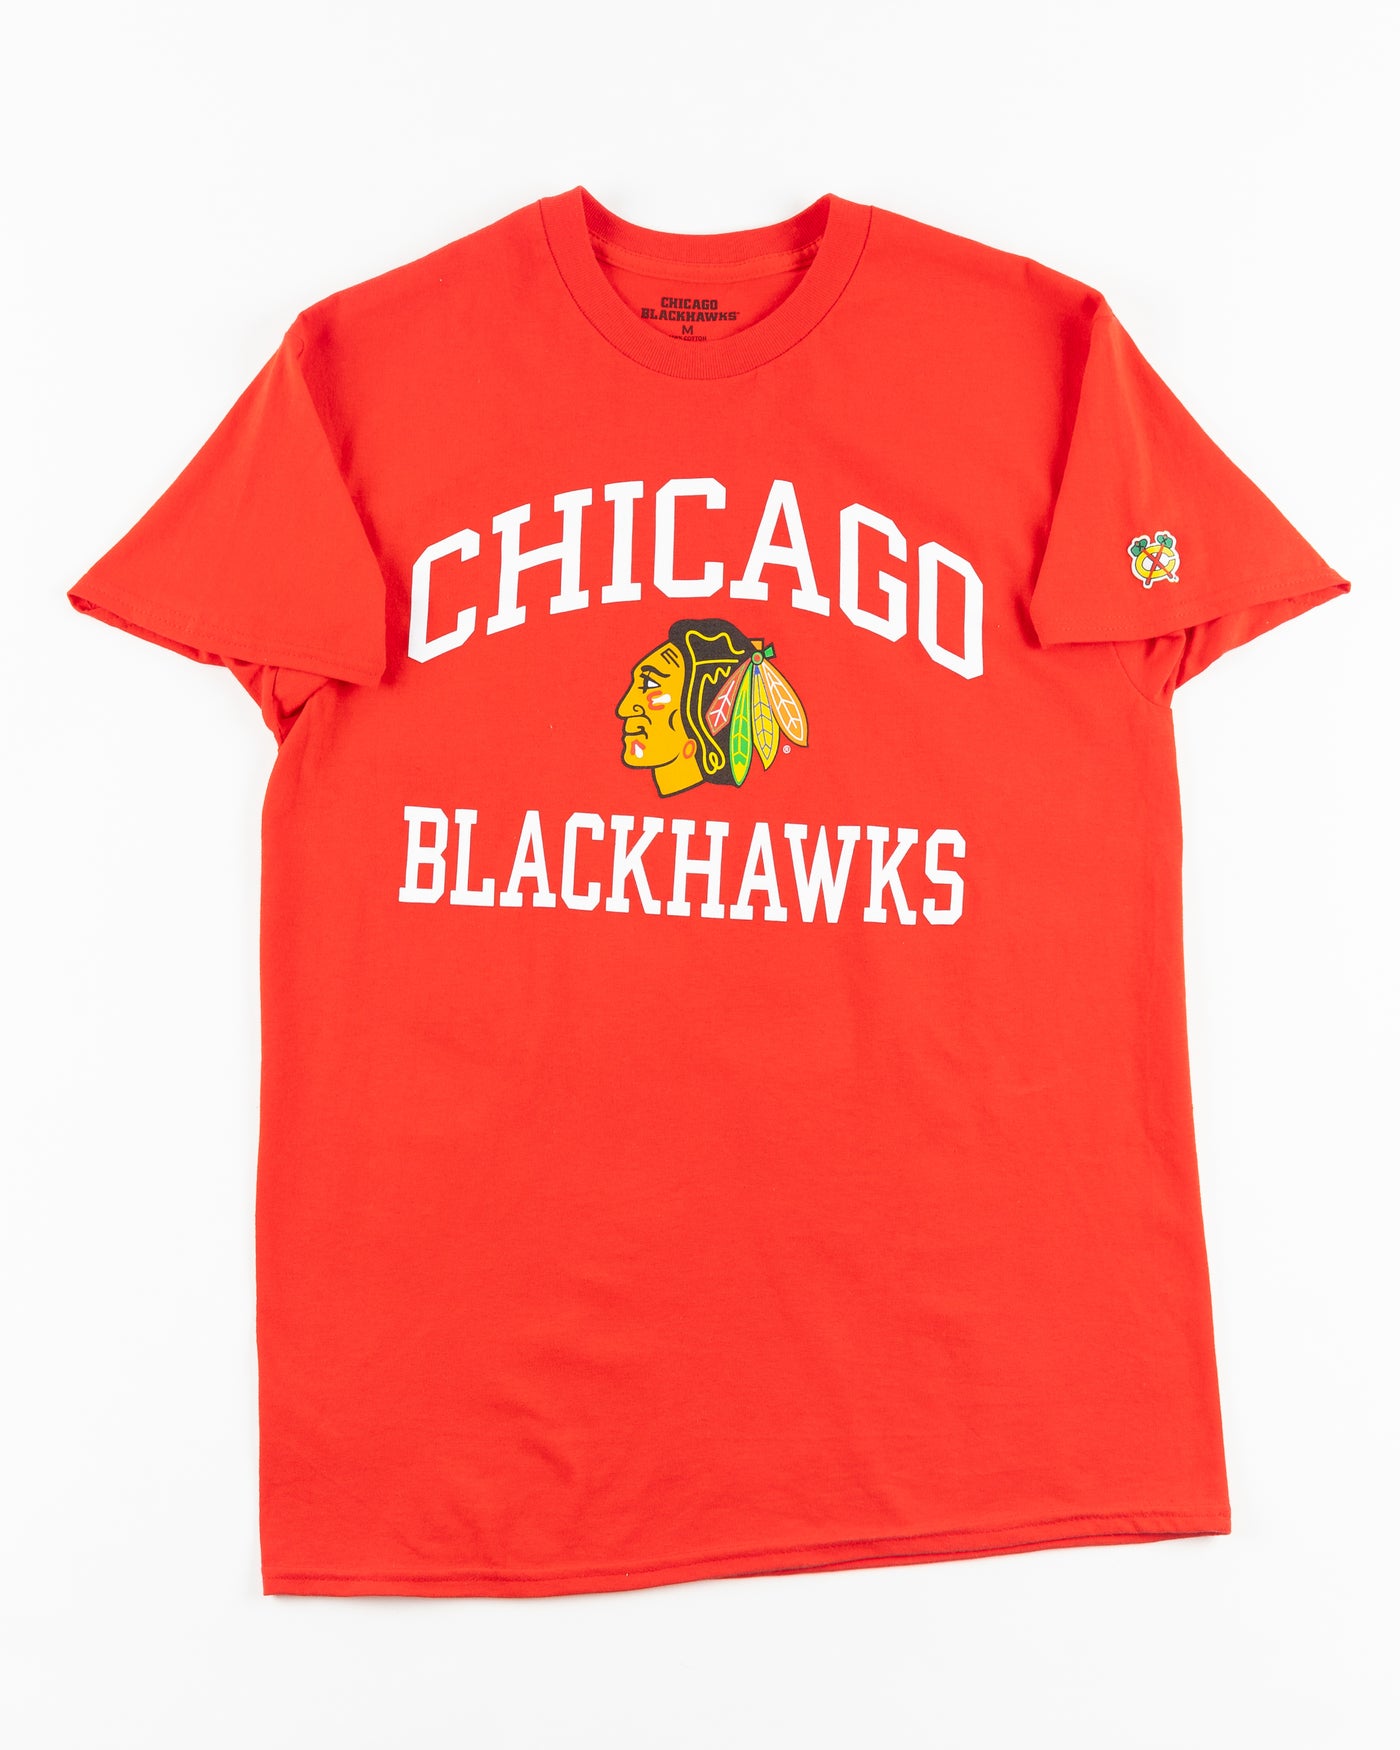 red Chicago Blackhawks short sleeve tee with wordmark and primary logo on chest and secondary logo on left shoulder - front lay flat